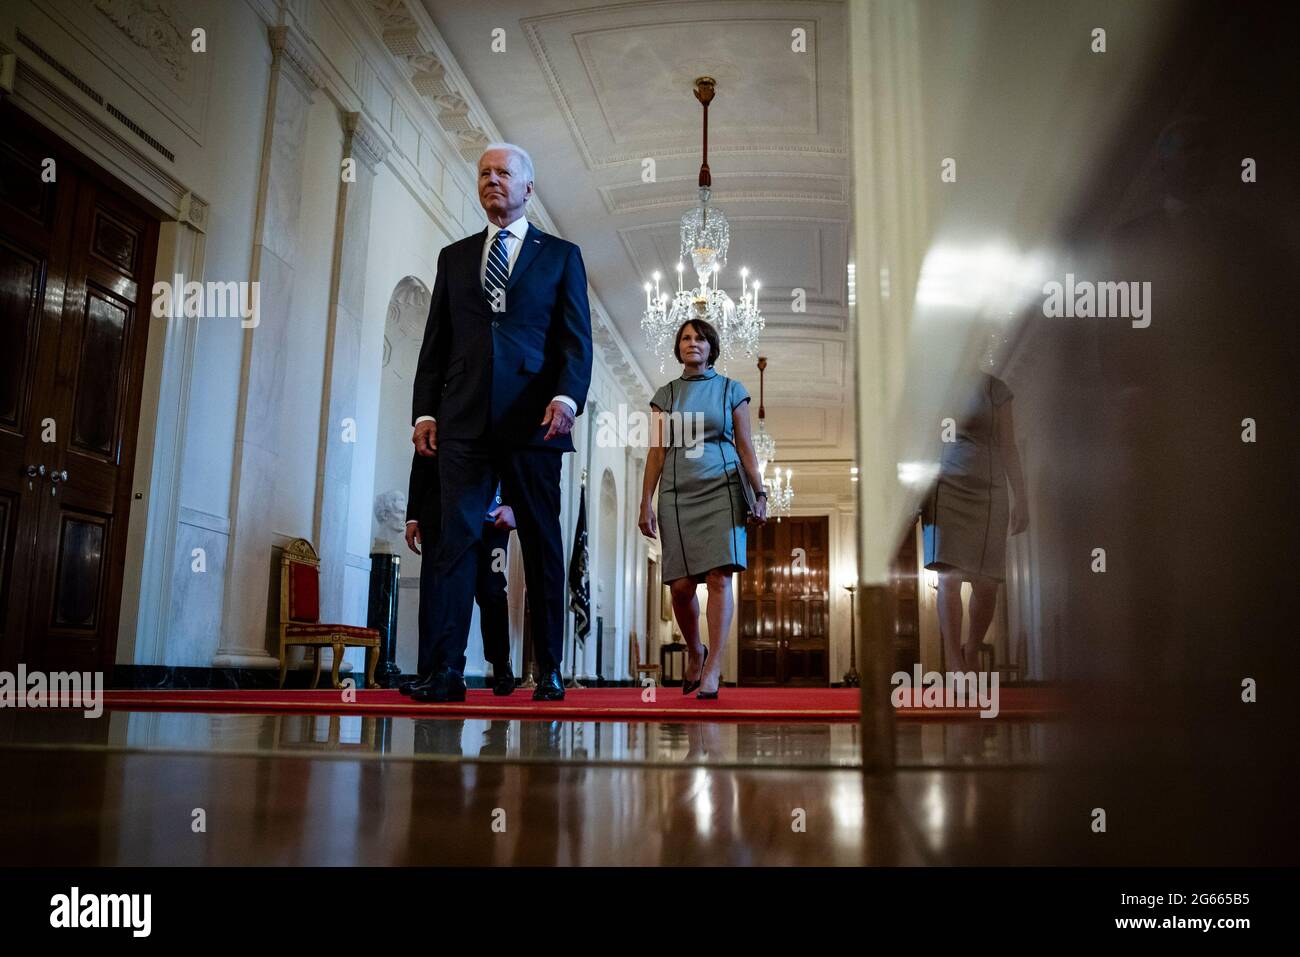 U.S. President Joe Biden is followed by Alejandro Mayorkas (L), Secretary of the Department of Homeland Security, and Tracy Renaud (R), acting director of U.S. Citizenship and Immigration Services (USCIS), as they arrive for a naturalization ceremony in the East Room of the White House in Washington, DC, U.S., on Friday, July 2, 2021. The ceremony is to welcome citizens to the United States ahead of Independence Day. Credit: Samuel Corum/Pool via CNP /MediaPunch Stock Photo